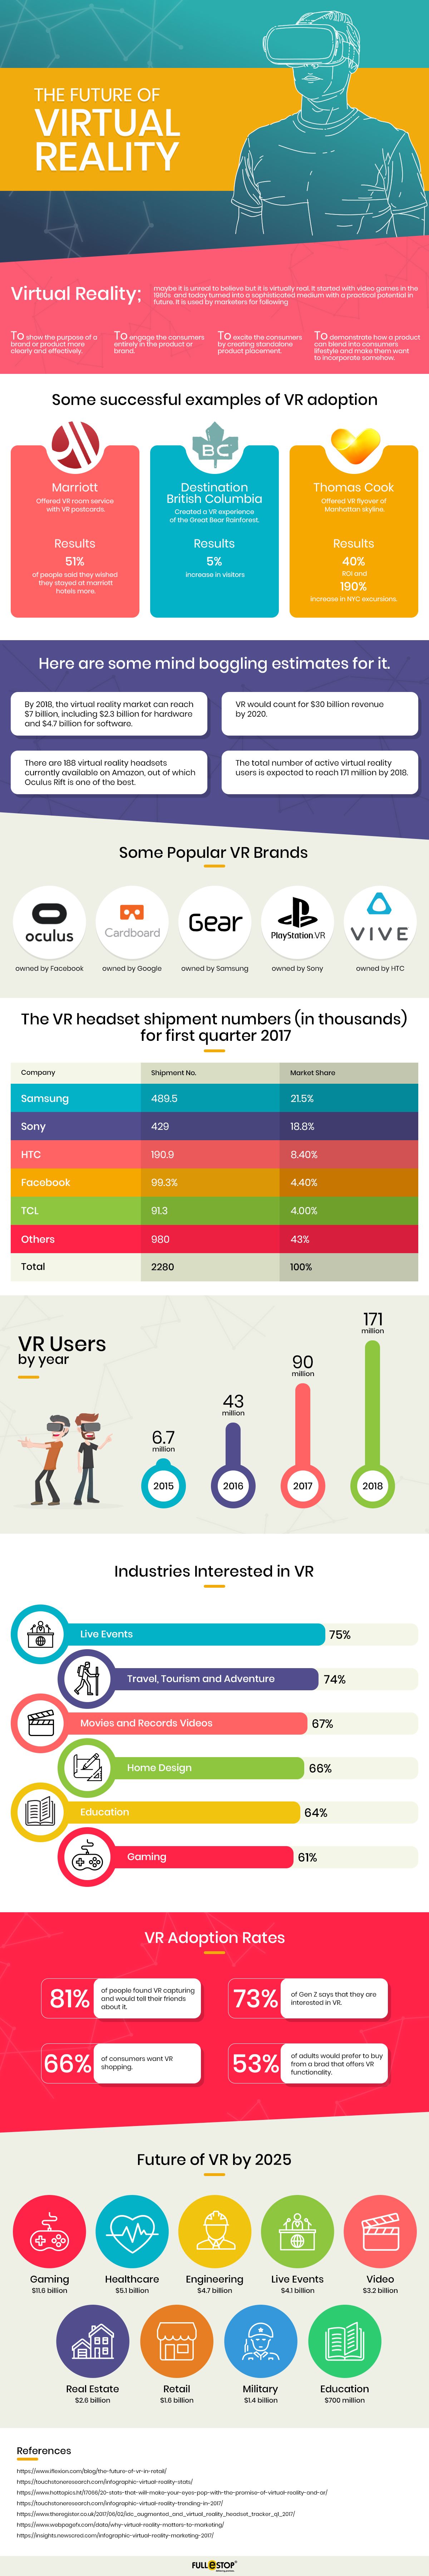 Infographic in the future of virtual reality